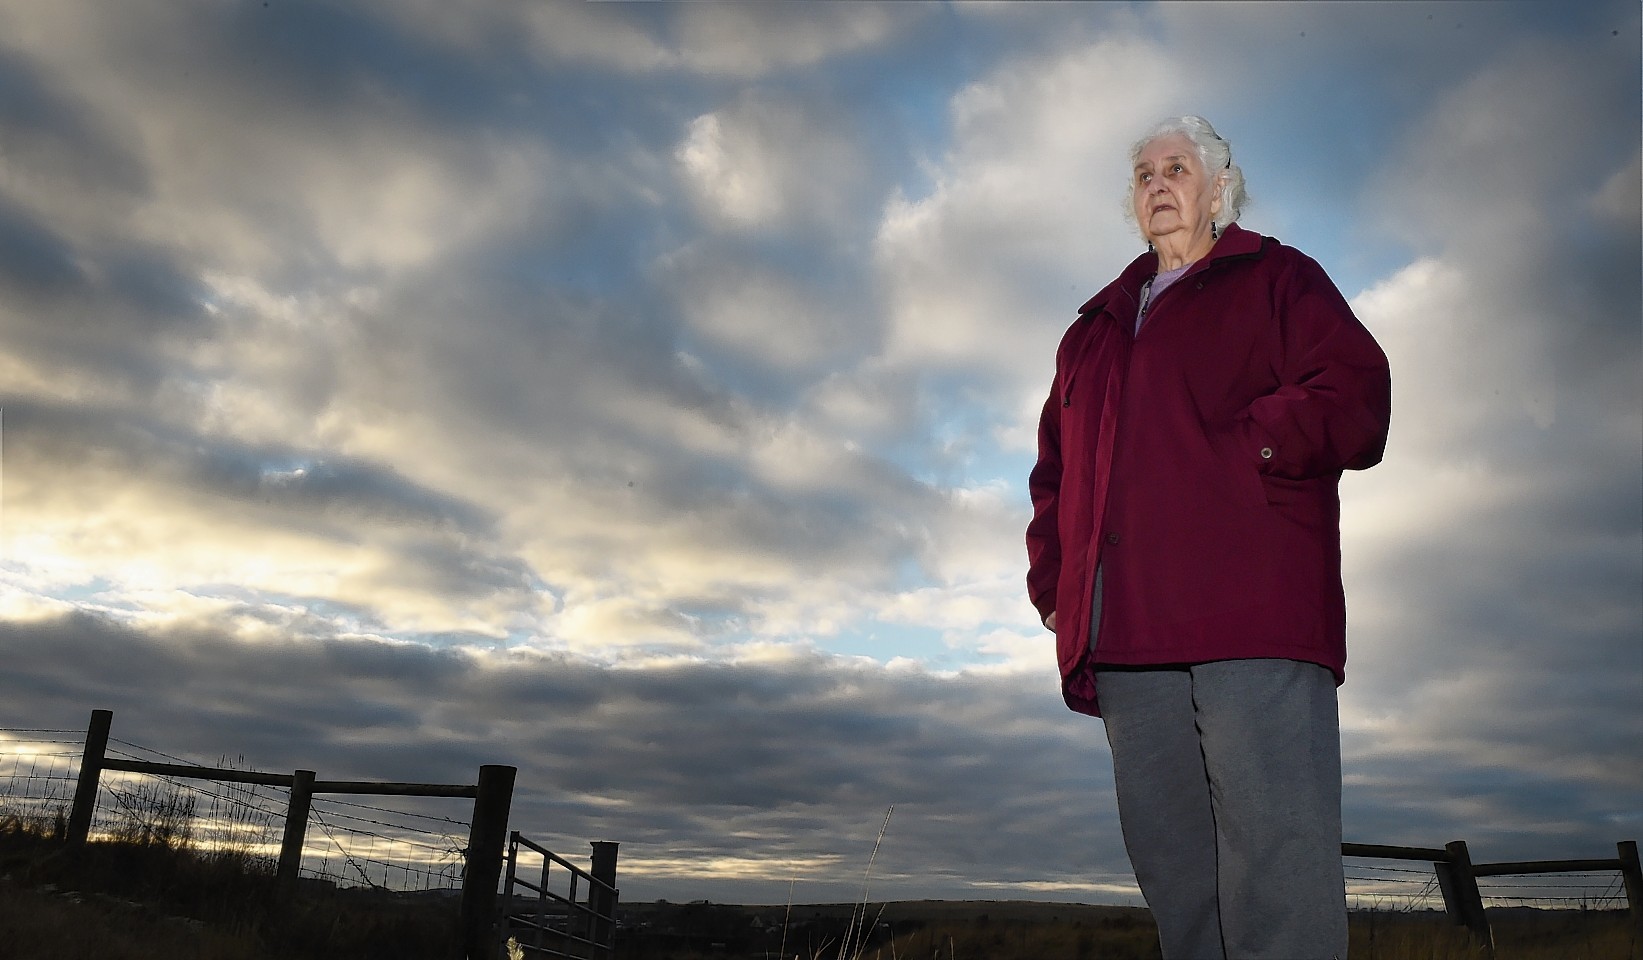 Edna Booth of Blackdog Residents Association, is protesting against plans to create a plant and pipeline on the Tarbothill Landfill Site near where she lives.
Picture by COLIN RENNIE  January 19, 2016.